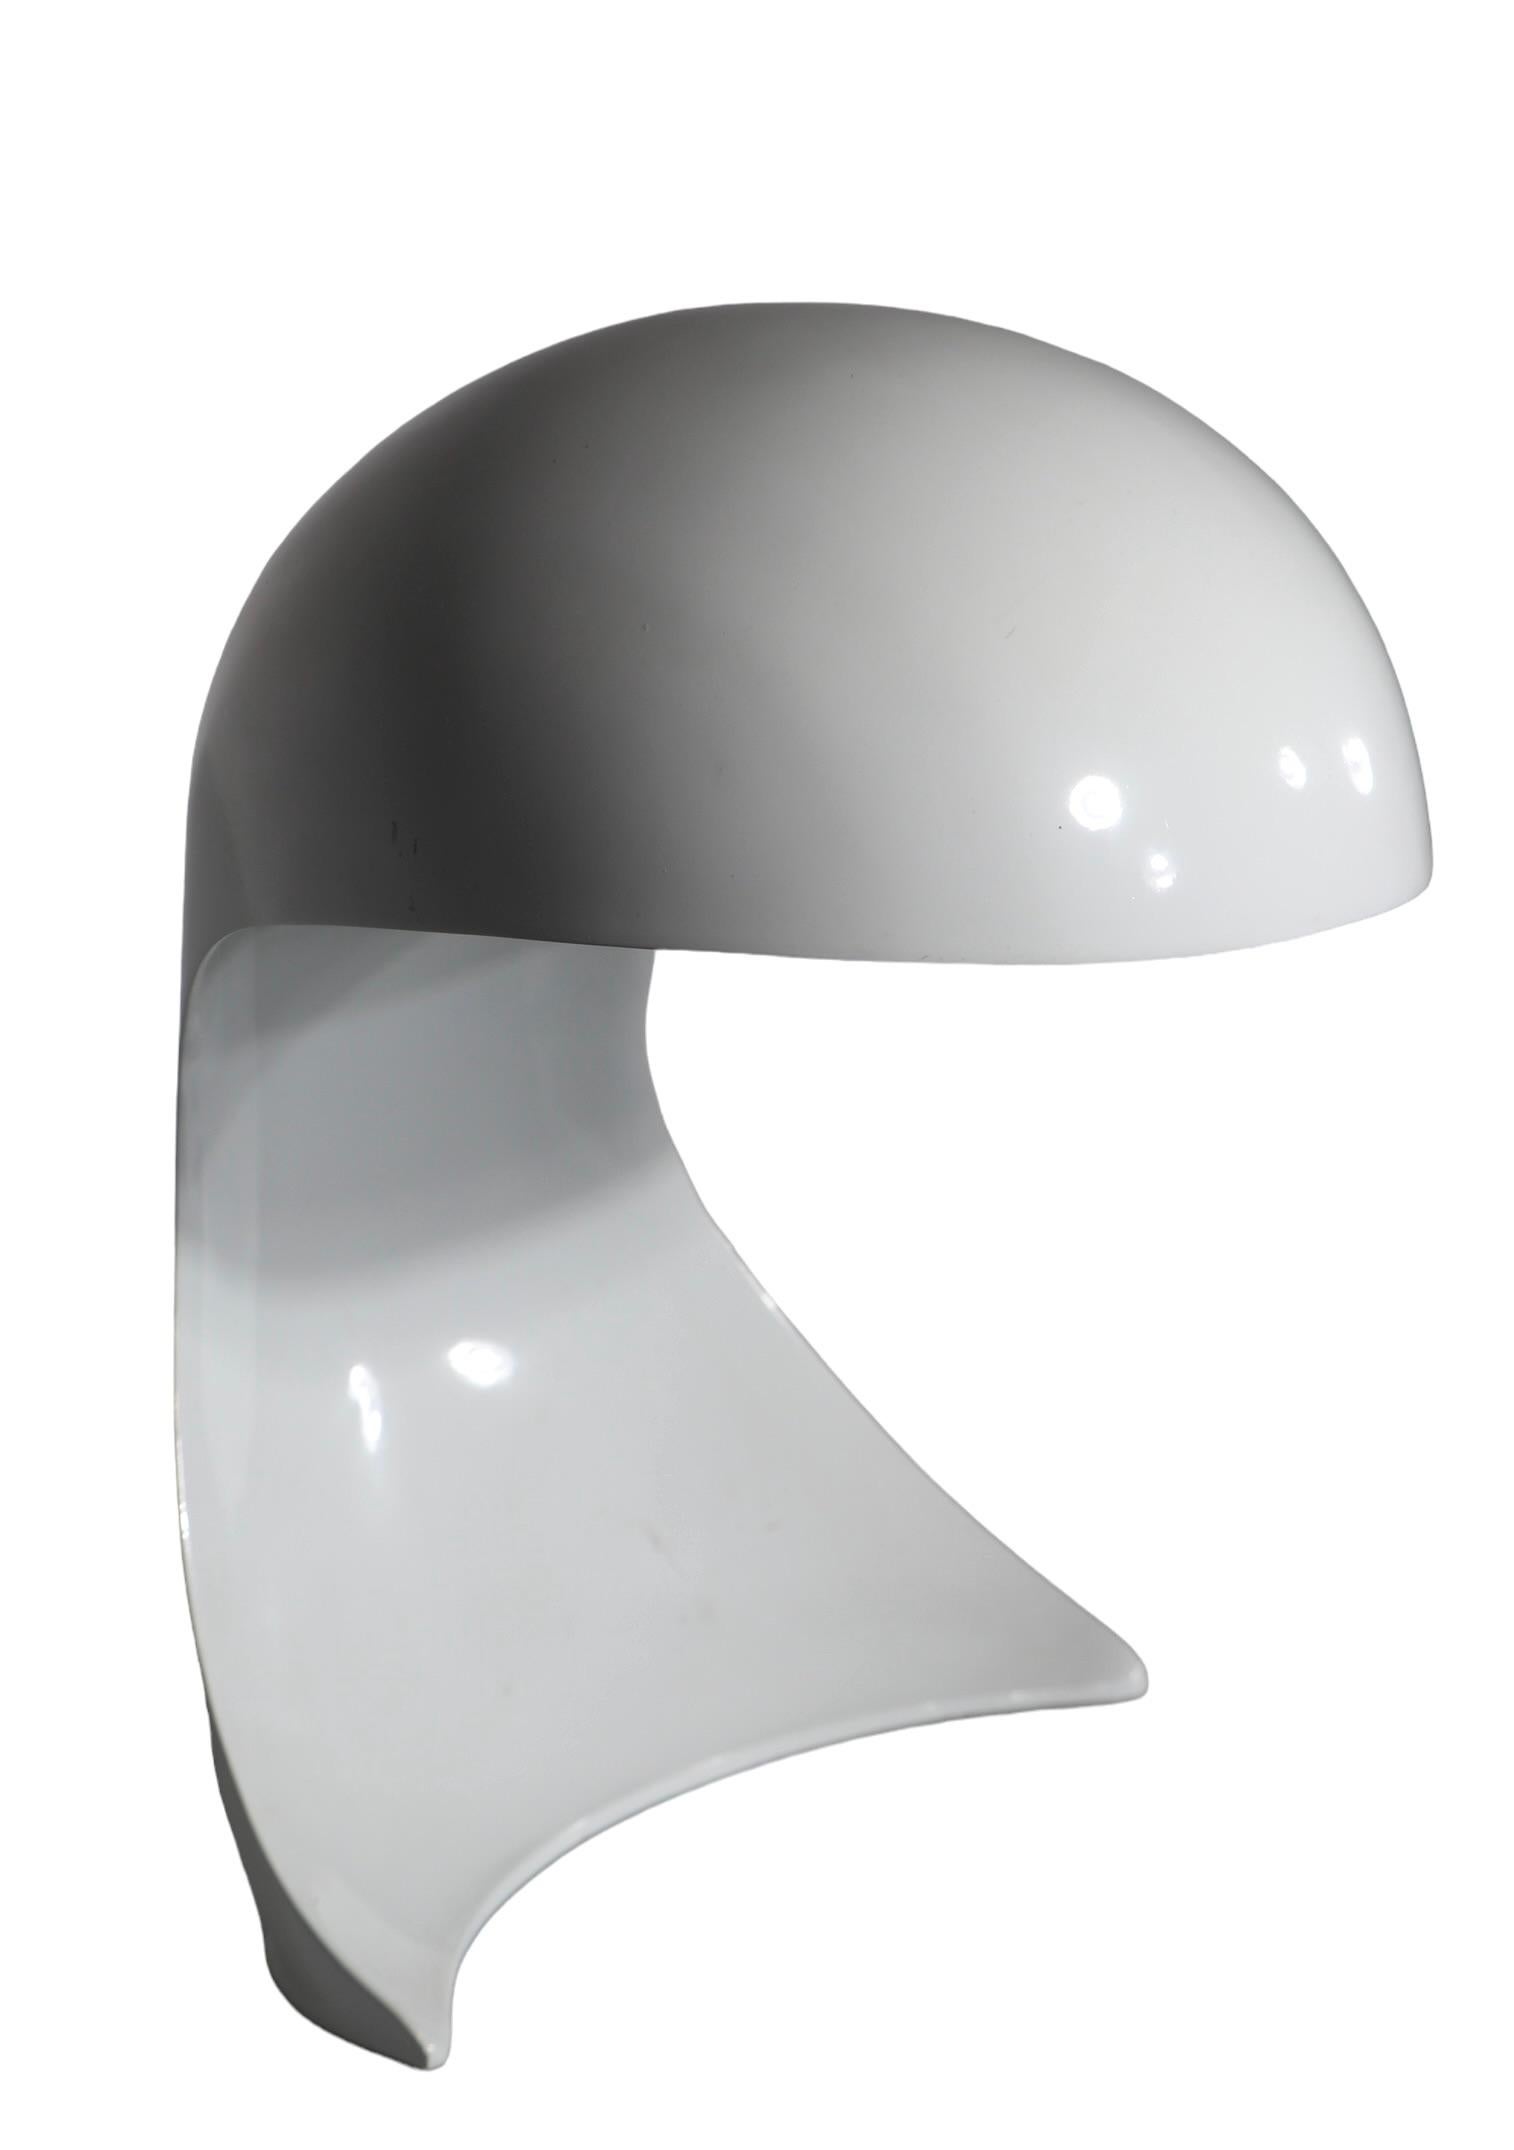 Classic Post Modern, Space Age Dania Table lamp, designed by Dario Tognon, for Artemide, made in Italy circa 1960’s.
The lamp features a white metal structure which is in original finish, it is currently wired for US application, accepts a standard